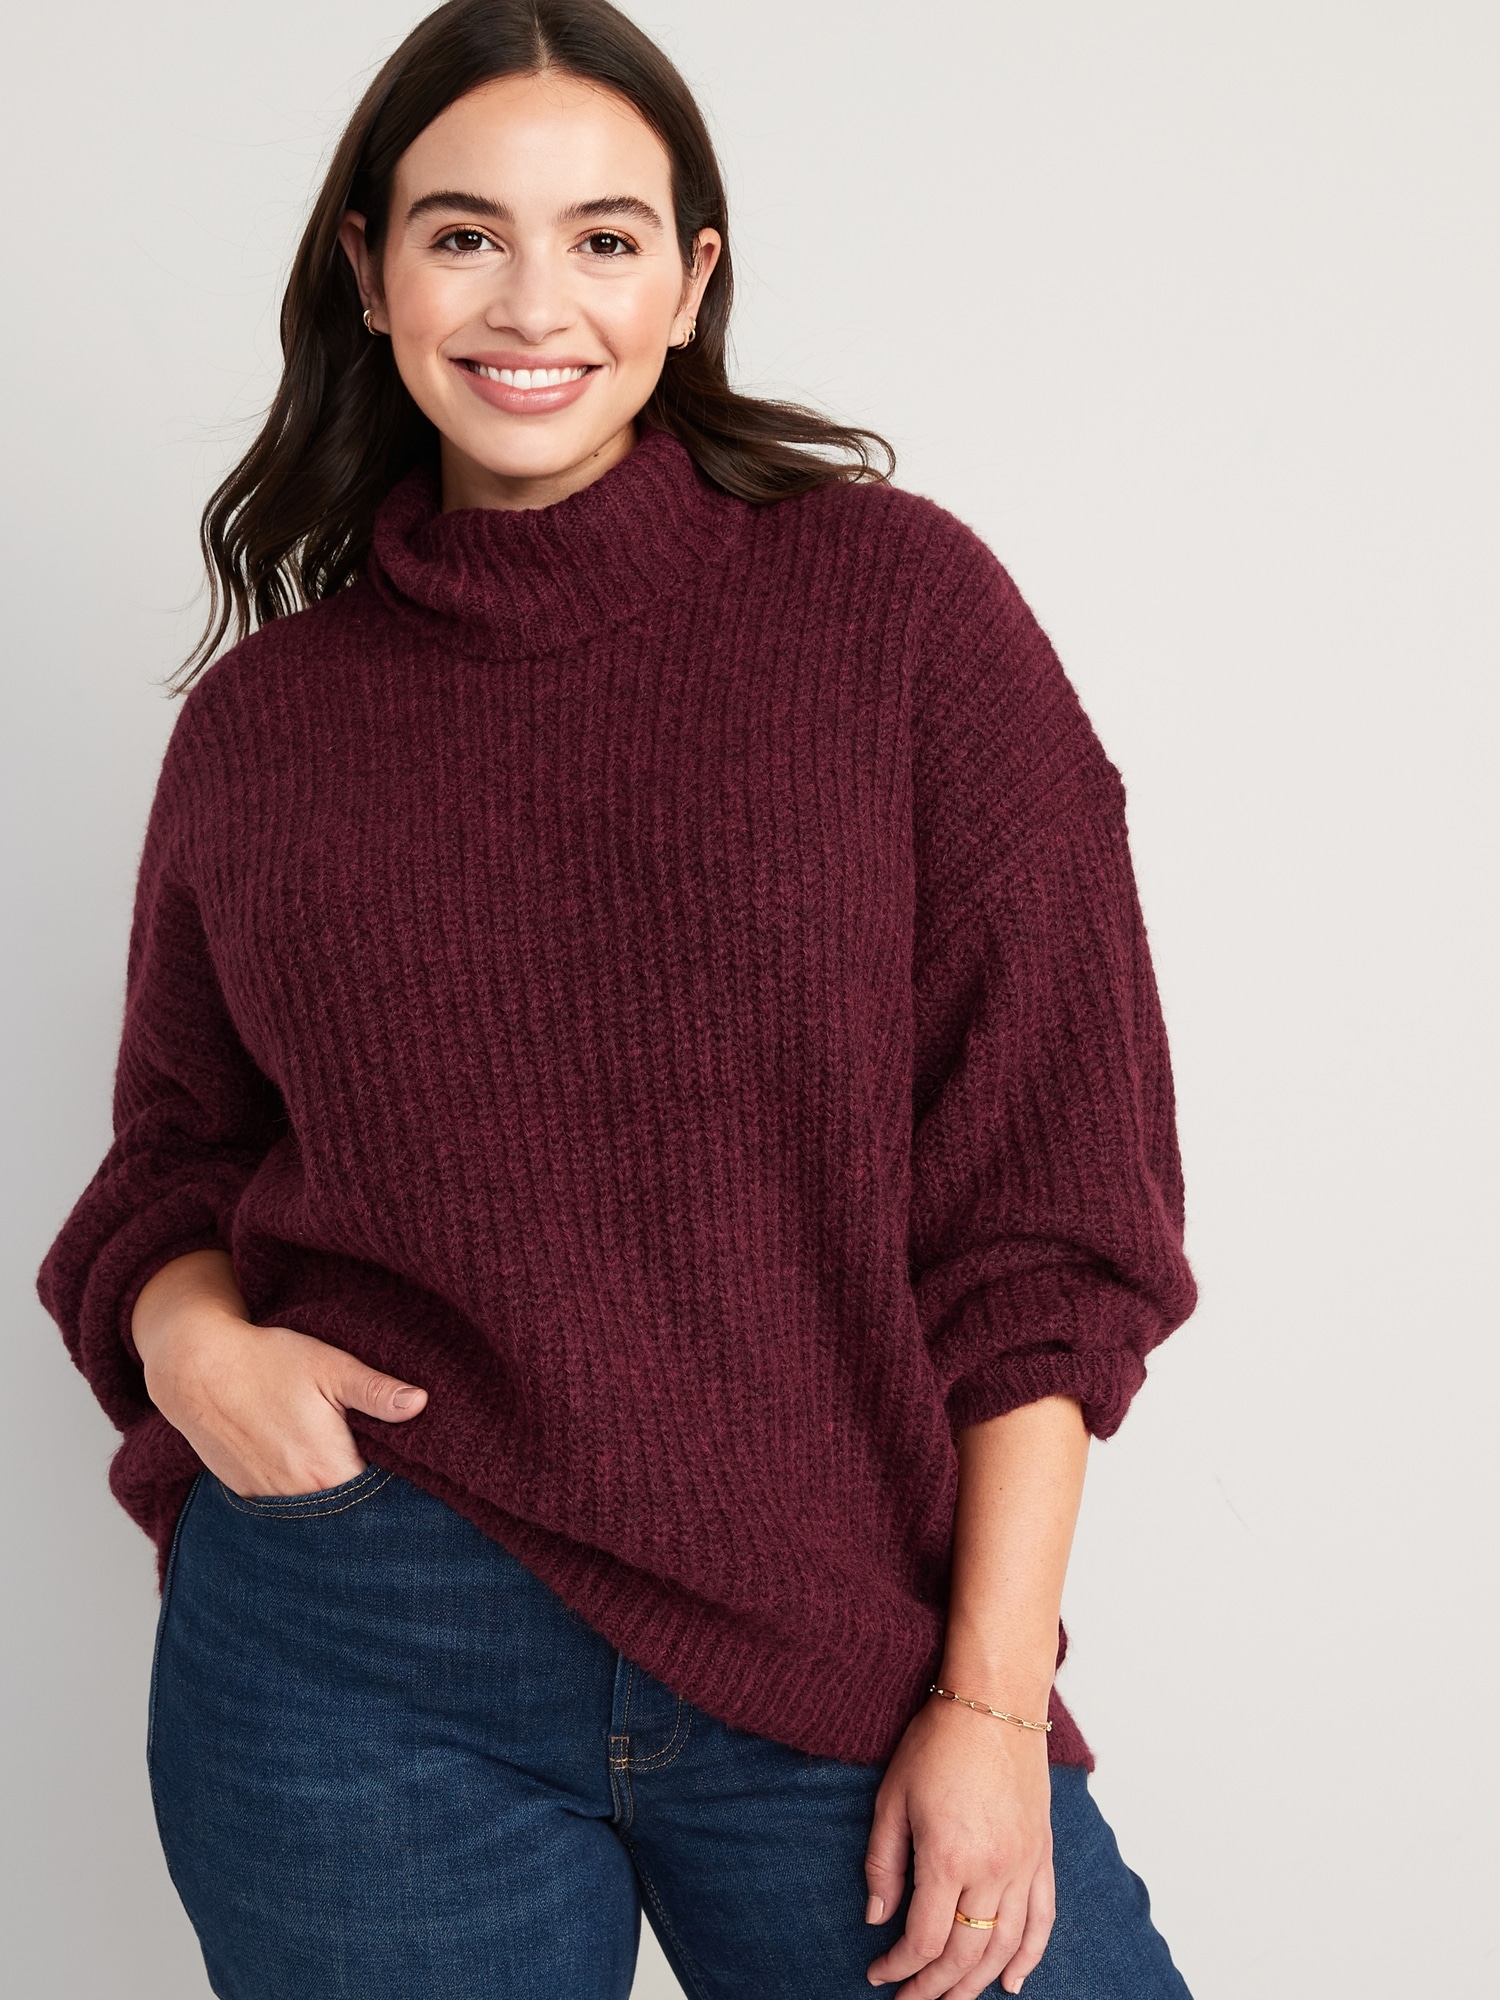 Shaker-Stitch Tunic-Length Turtleneck Sweater for Women | Old Navy